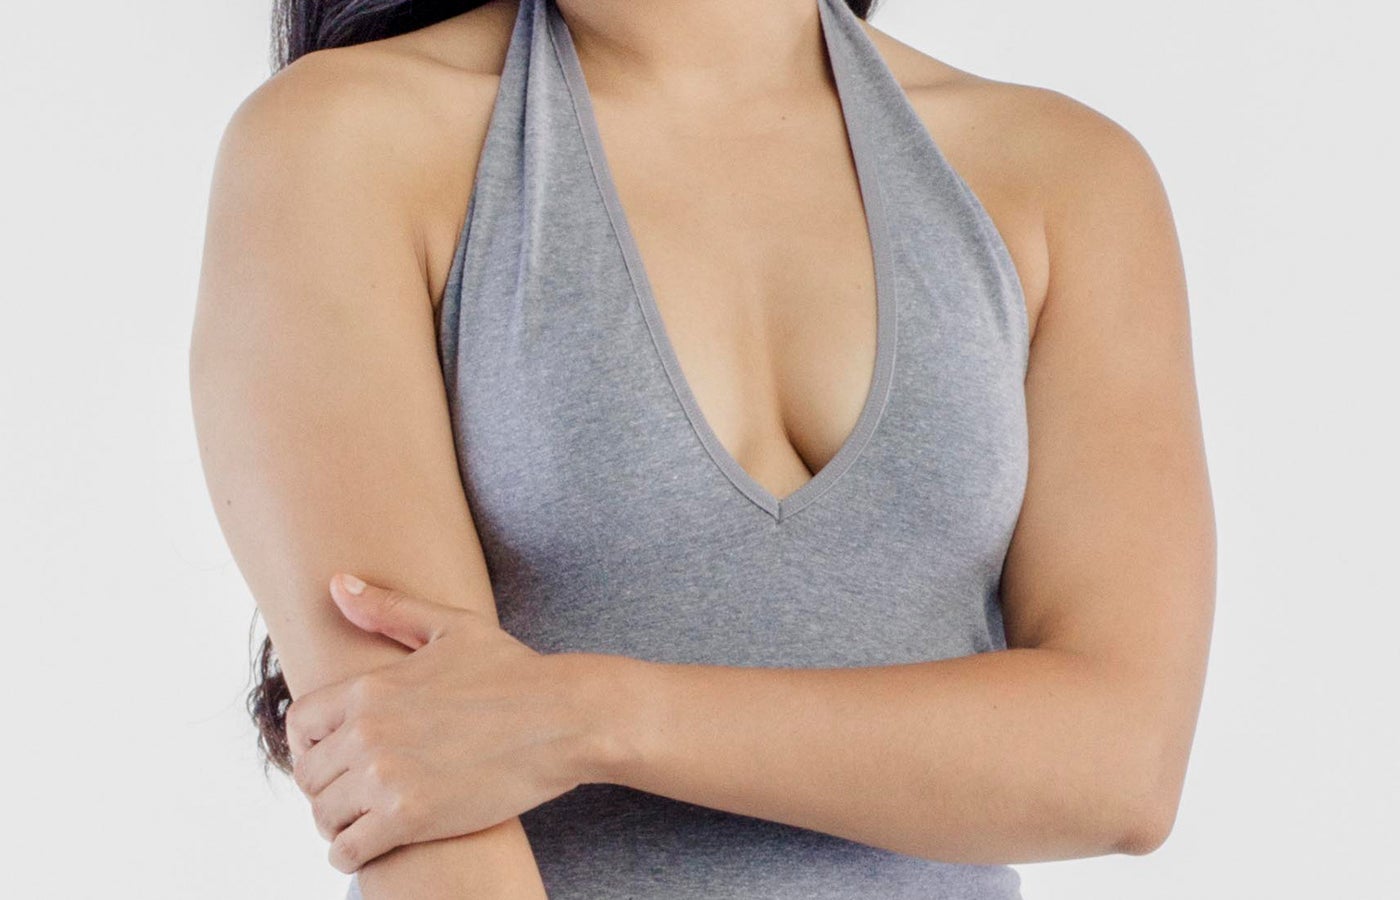 What to expect with breast reduction surgery - West End Plastic Surgery